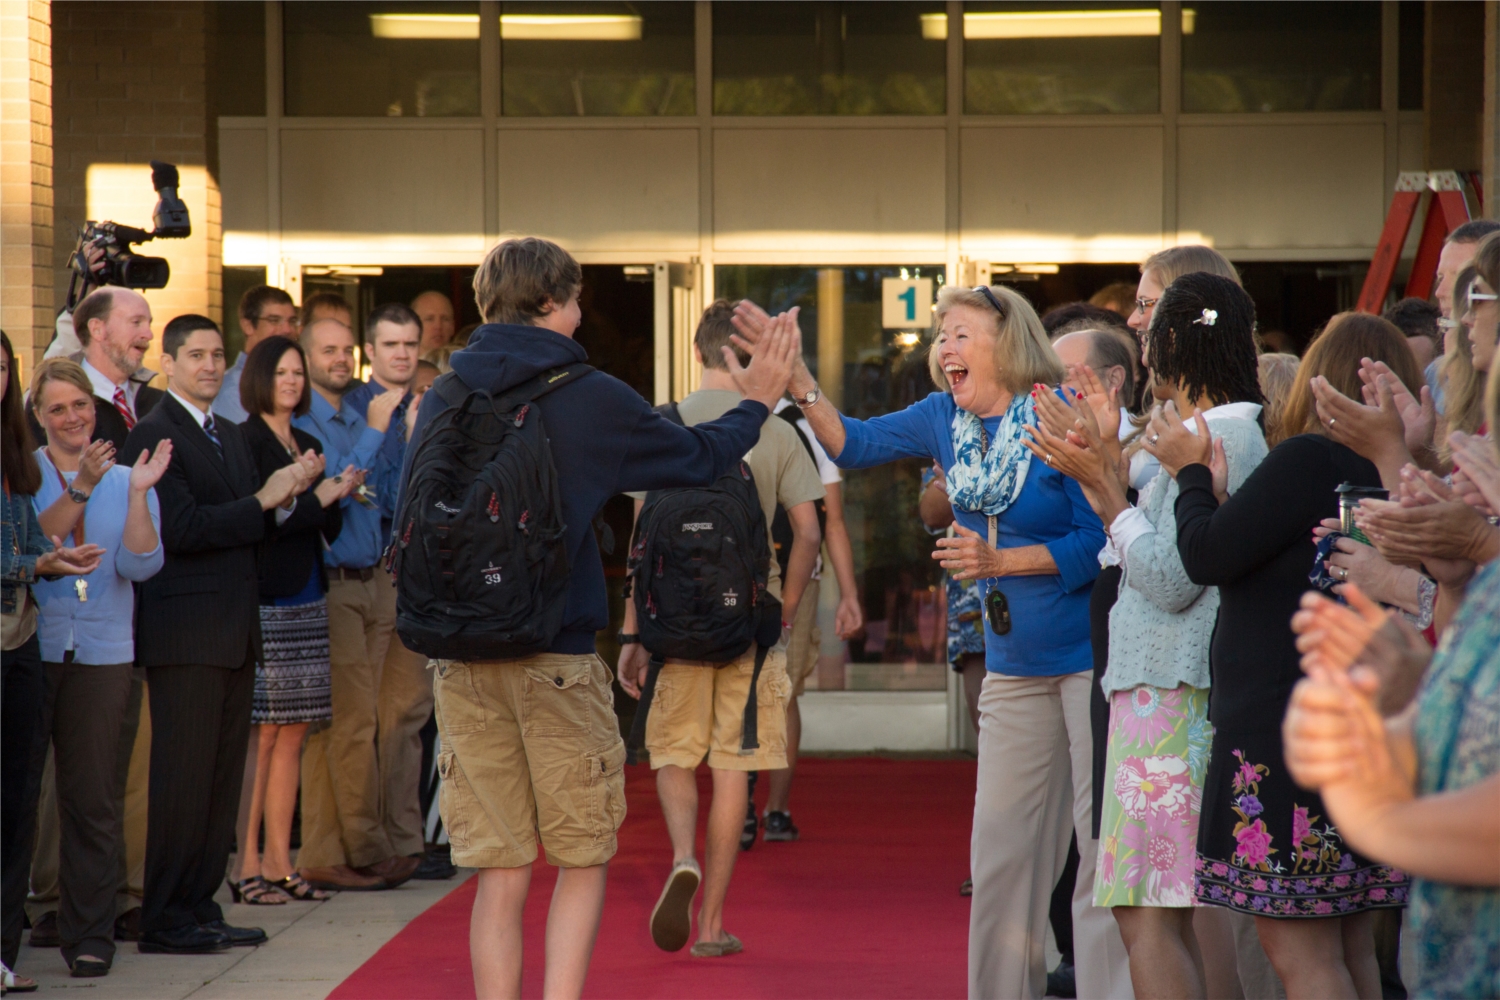 Nicolet High School staff members welcome students back to school annually on the red carpet.